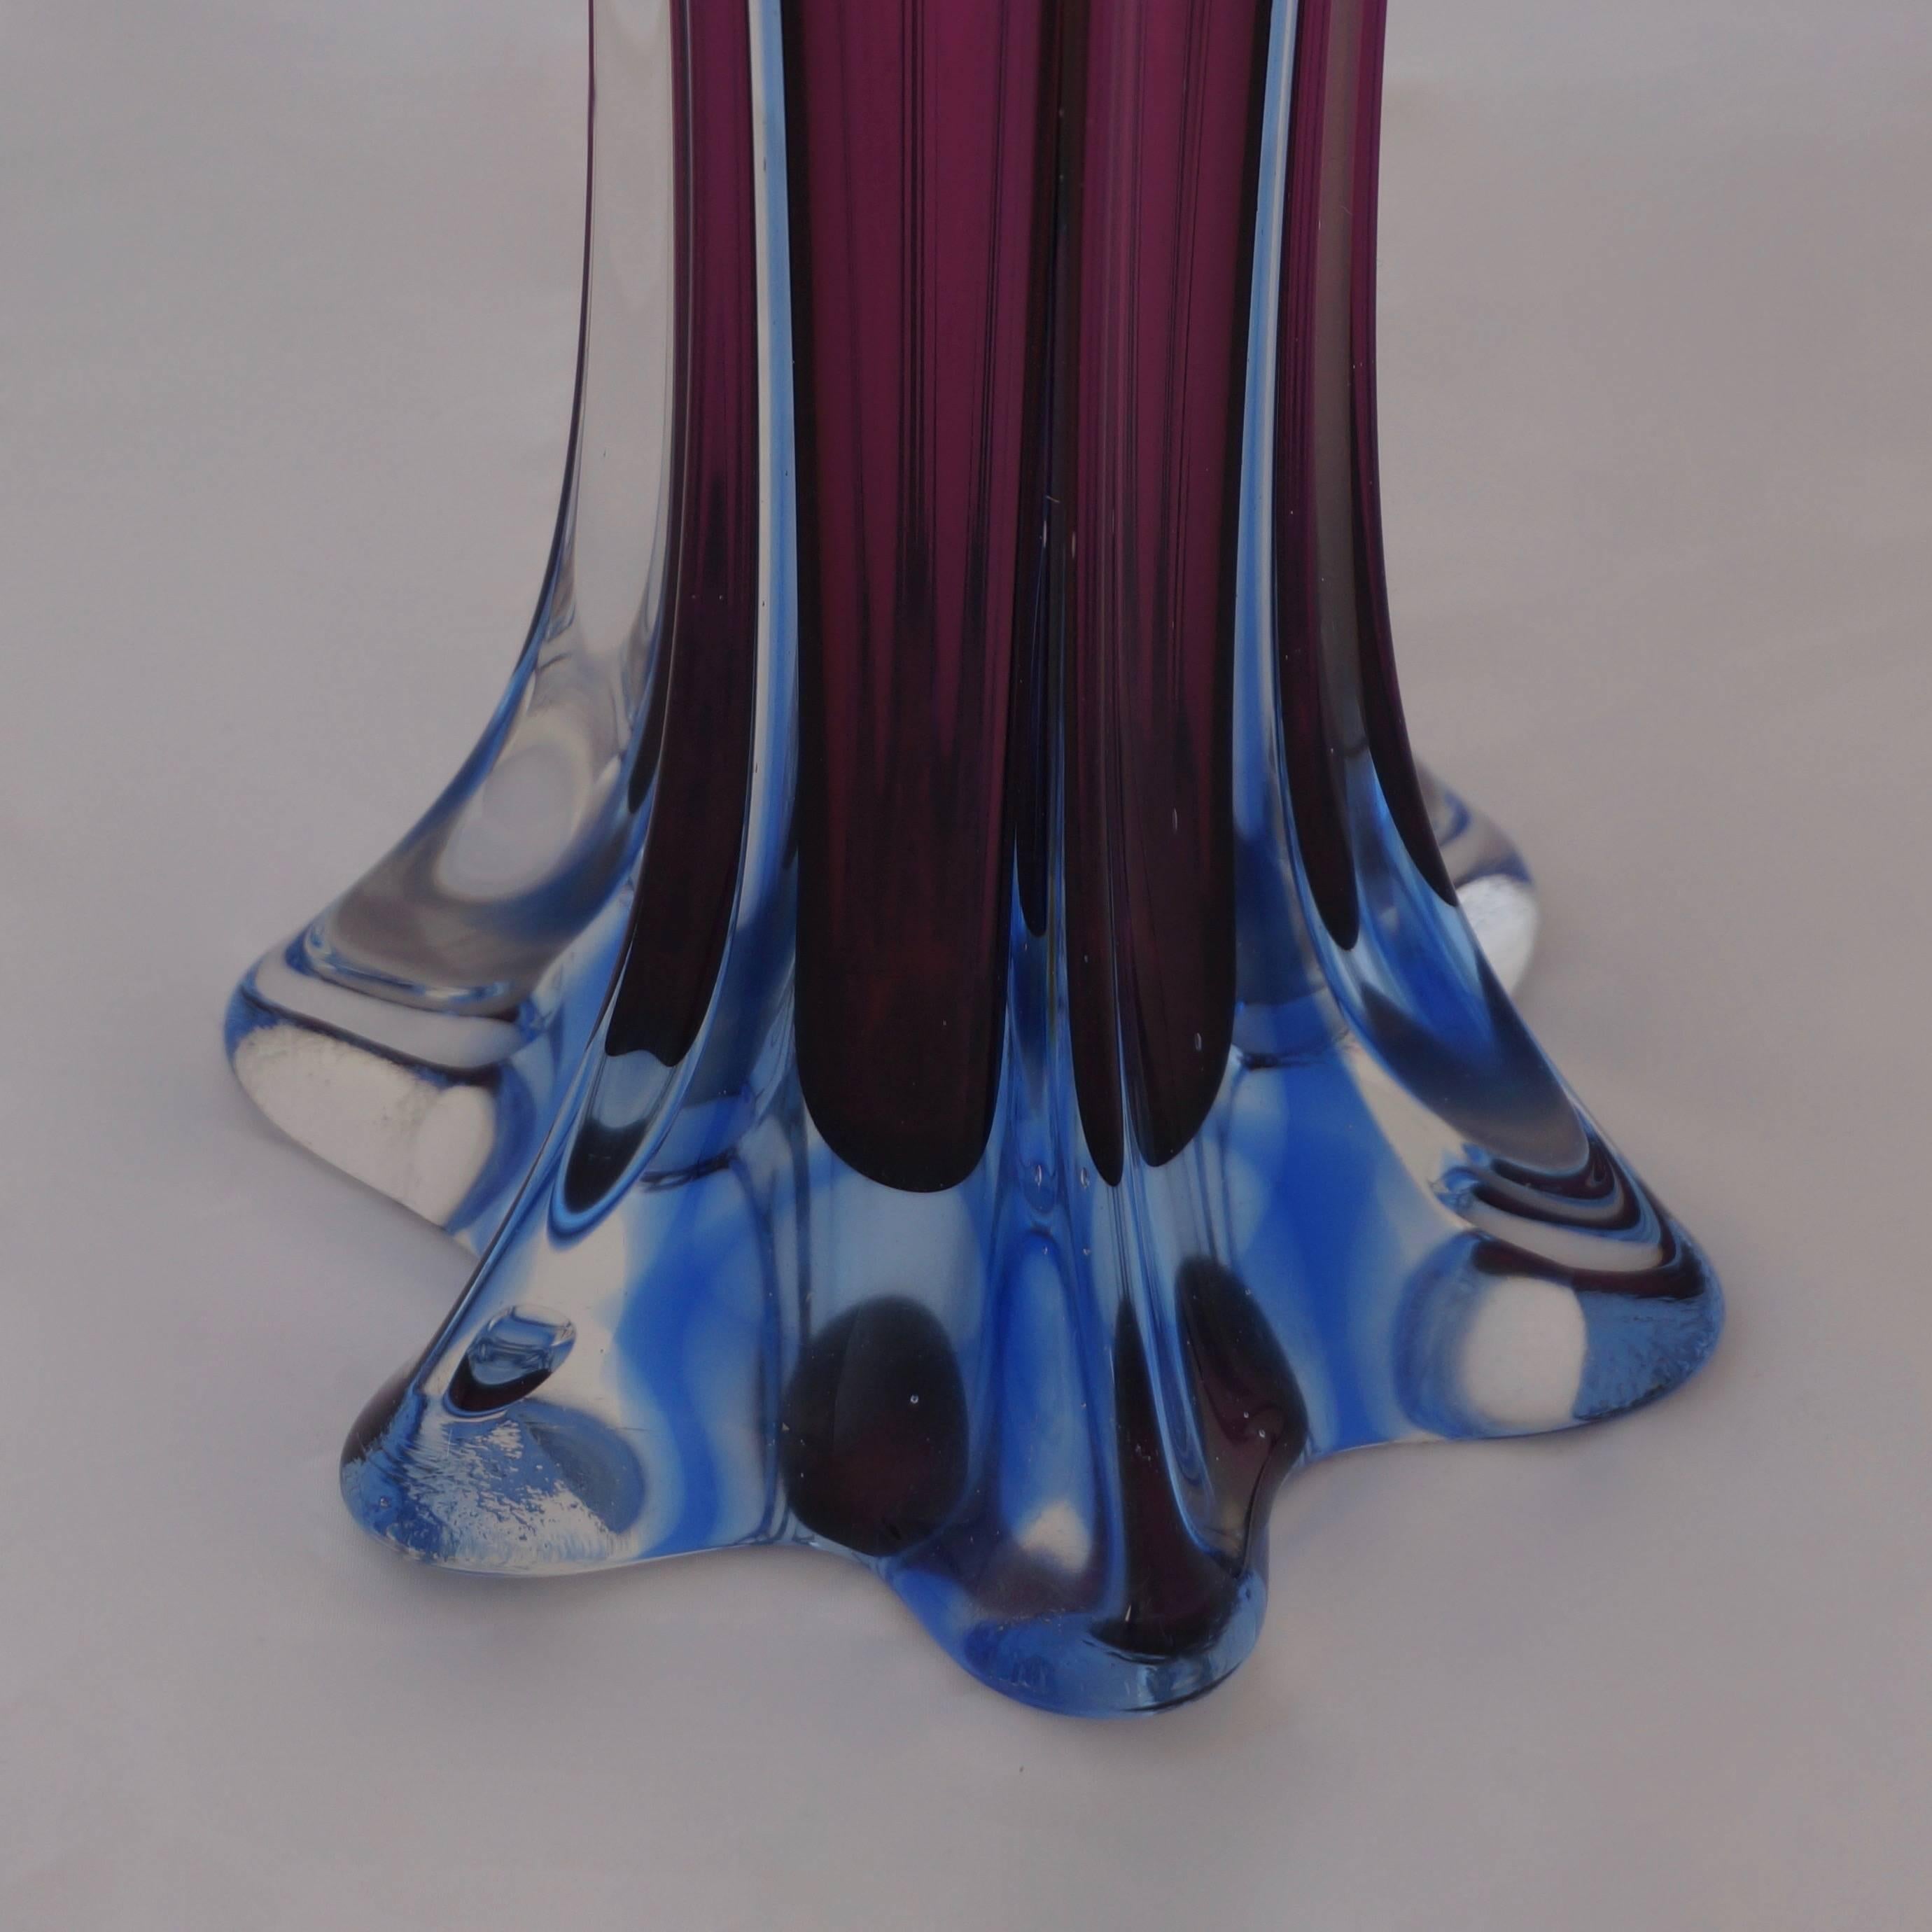 An Italian Murano glass vase manufactured in the 1960s.